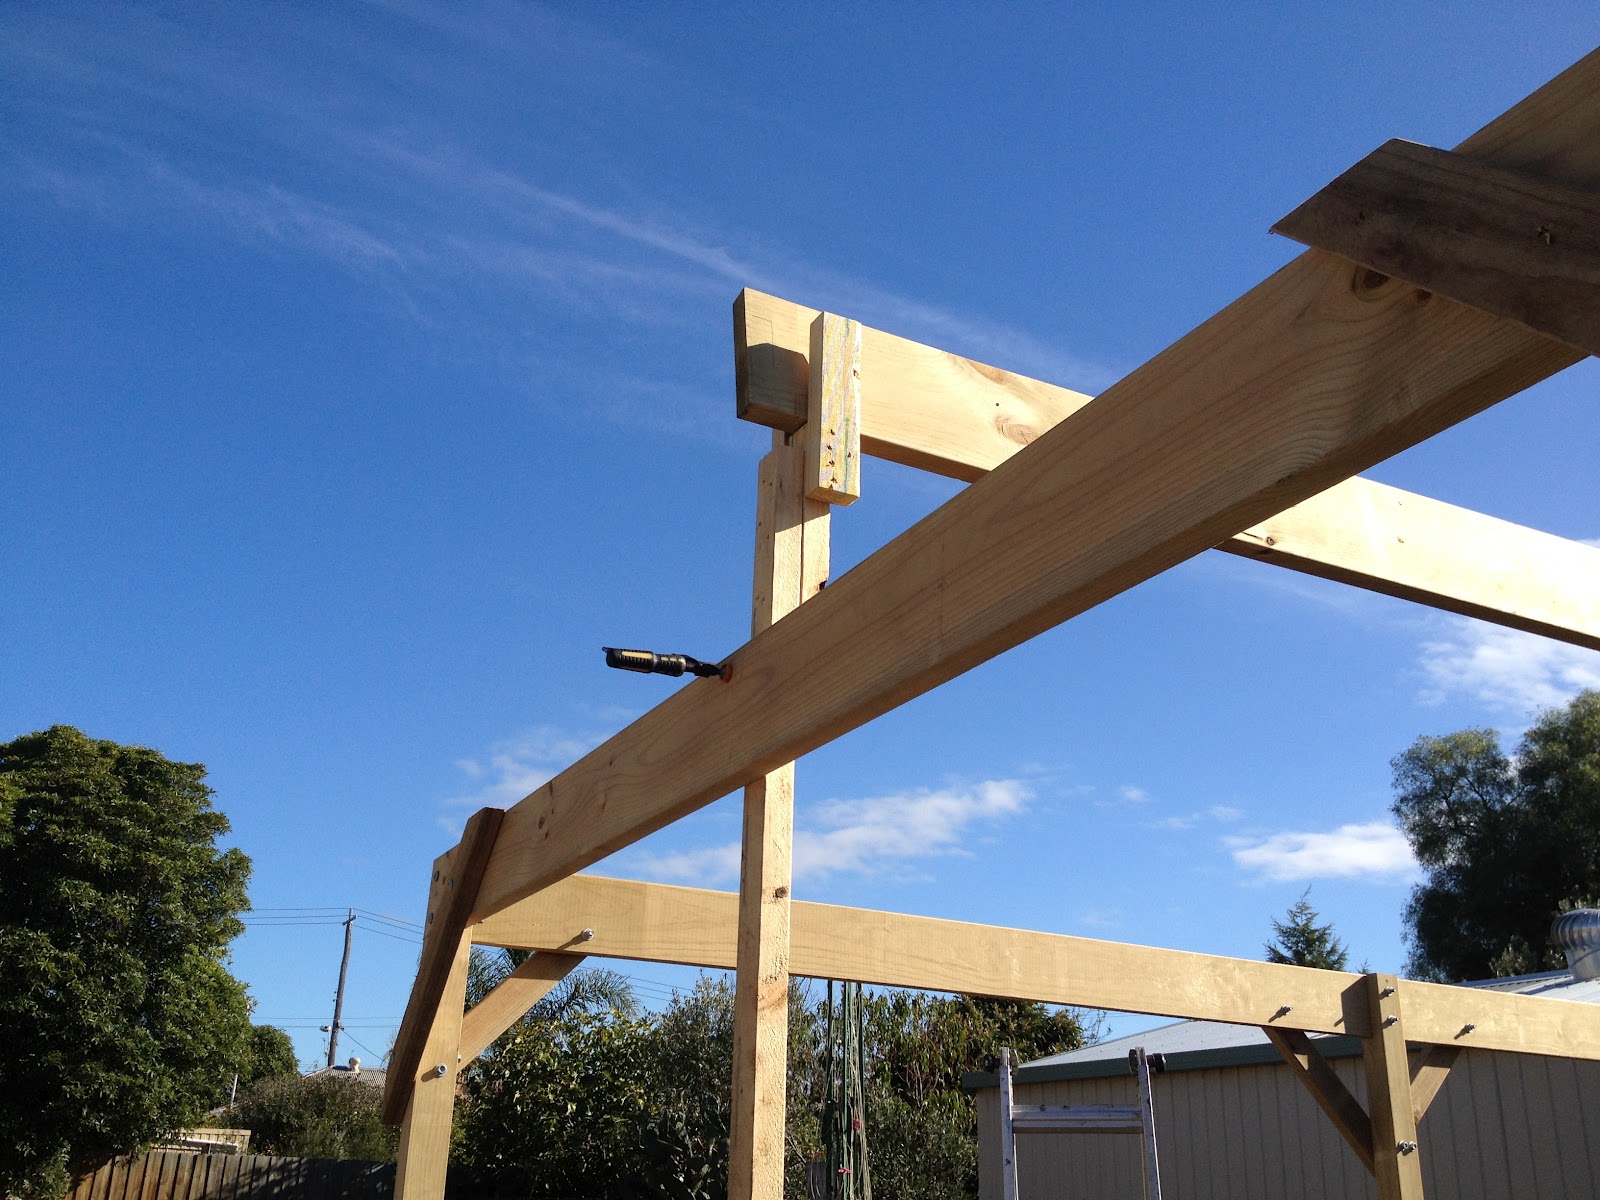 Ubuild Projects: How To Build a Timber Carport